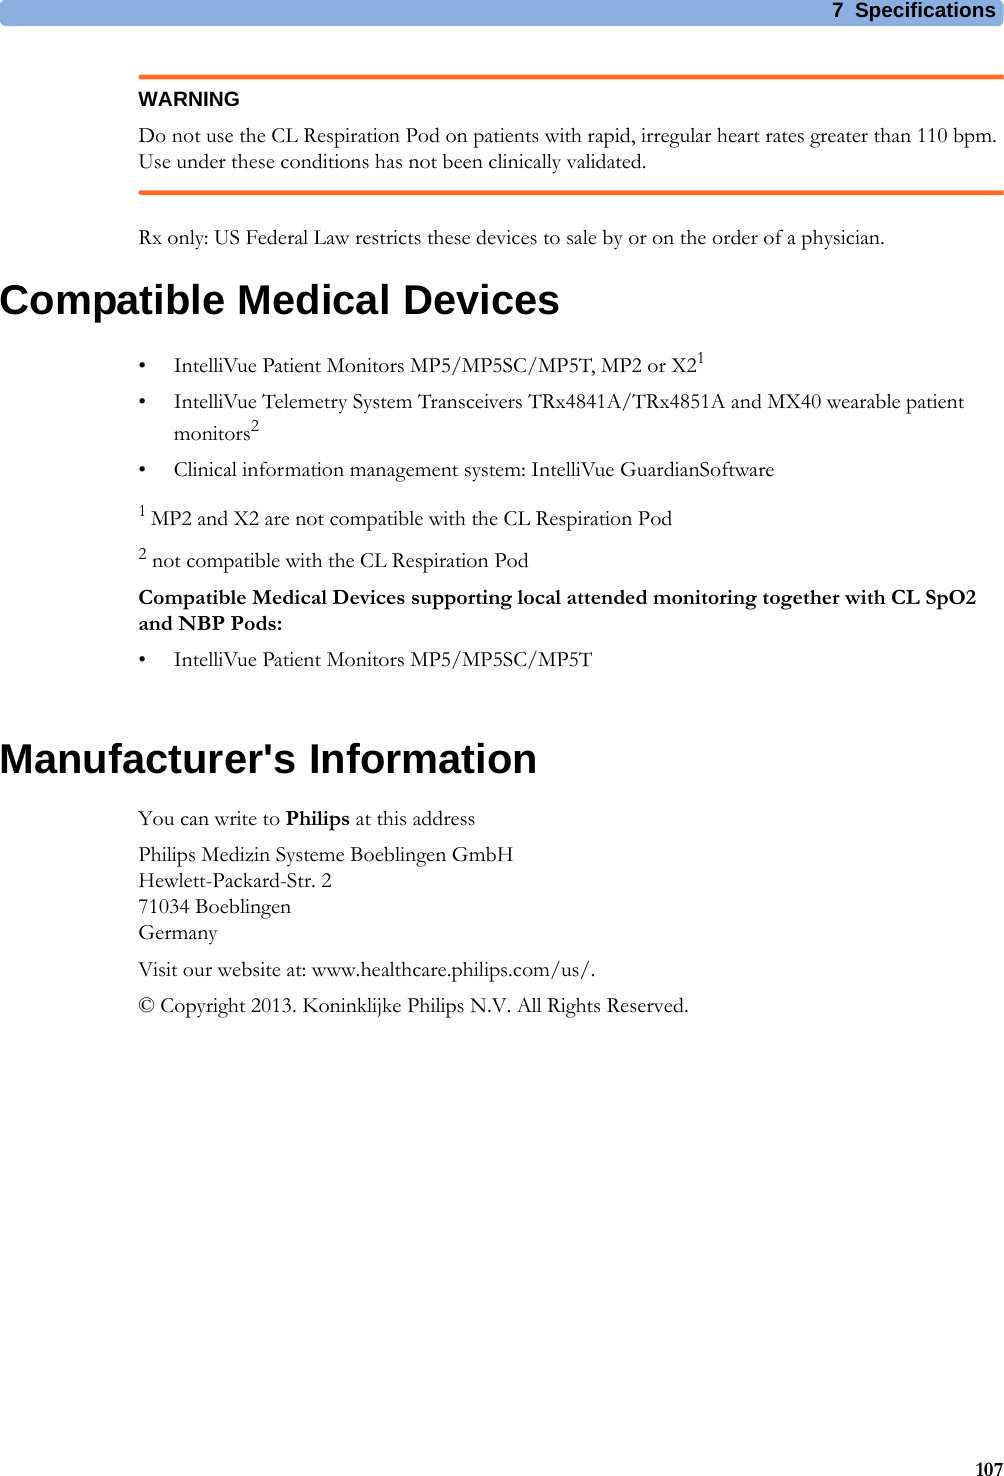 7 Specifications107WARNINGDo not use the CL Respiration Pod on patients with rapid, irregular heart rates greater than 110 bpm. Use under these conditions has not been clinically validated.Rx only: US Federal Law restricts these devices to sale by or on the order of a physician.Compatible Medical Devices• IntelliVue Patient Monitors MP5/MP5SC/MP5T, MP2 or X21• IntelliVue Telemetry System Transceivers TRx4841A/TRx4851A and MX40 wearable patient monitors2• Clinical information management system: IntelliVue GuardianSoftware1 MP2 and X2 are not compatible with the CL Respiration Pod2 not compatible with the CL Respiration PodCompatible Medical Devices supporting local attended monitoring together with CL SpO2 and NBP Pods:• IntelliVue Patient Monitors MP5/MP5SC/MP5TManufacturer&apos;s InformationYou can write to Philips at this addressPhilips Medizin Systeme Boeblingen GmbHHewlett-Packard-Str. 271034 BoeblingenGermanyVisit our website at: www.healthcare.philips.com/us/.© Copyright 2013. Koninklijke Philips N.V. All Rights Reserved.